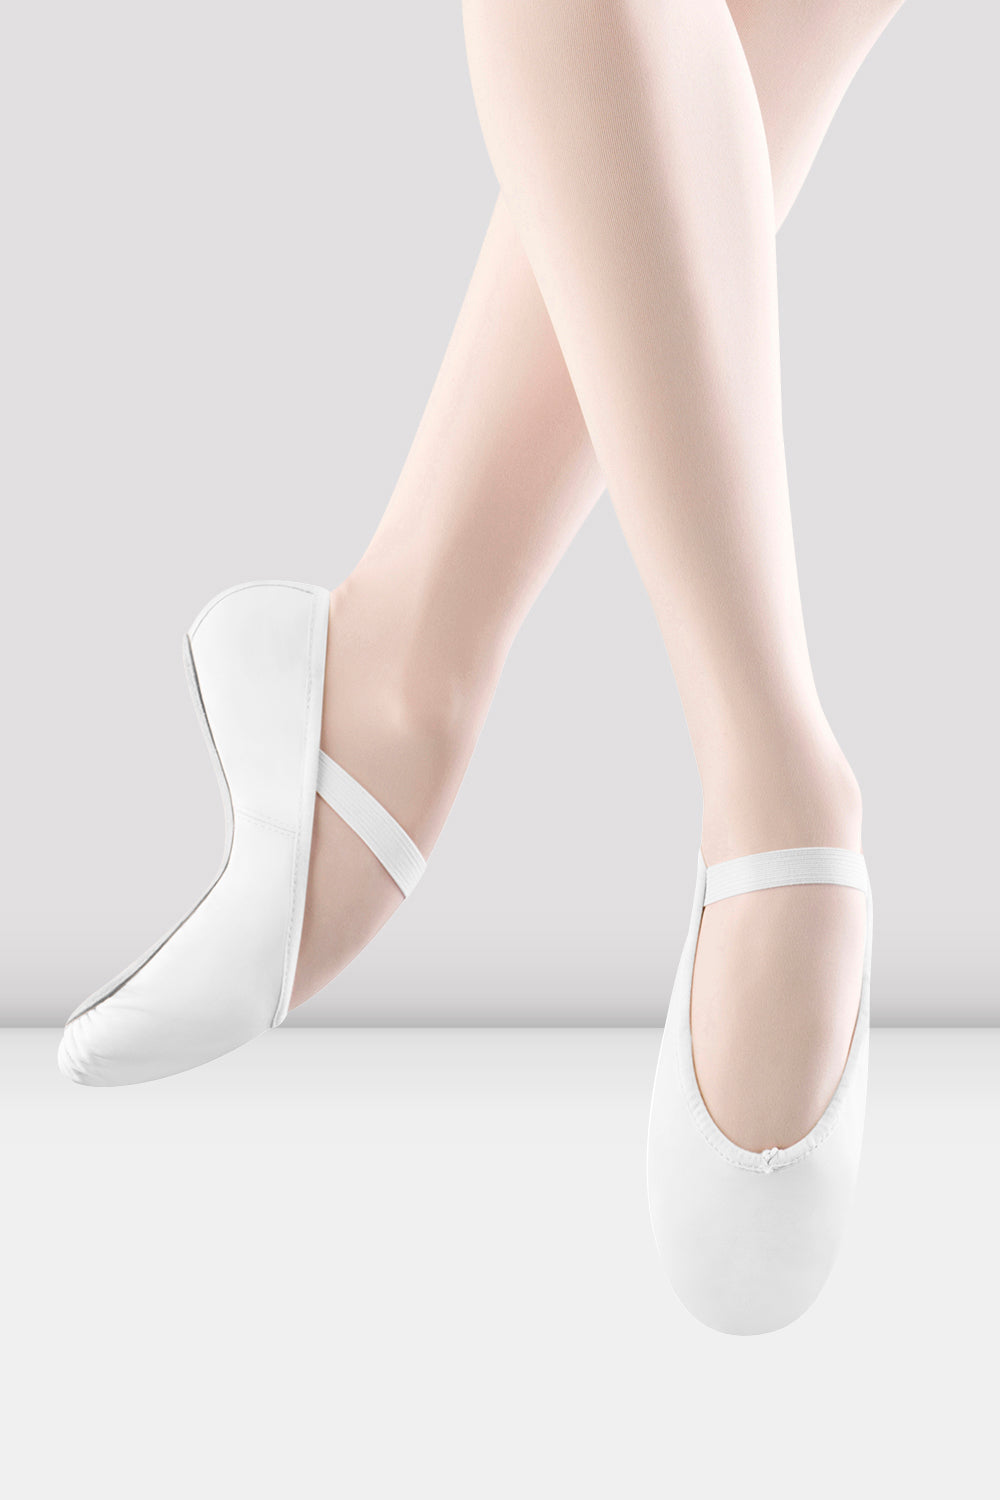 BLOCH Ladies Arise Leather Ballet Shoes, White Leather